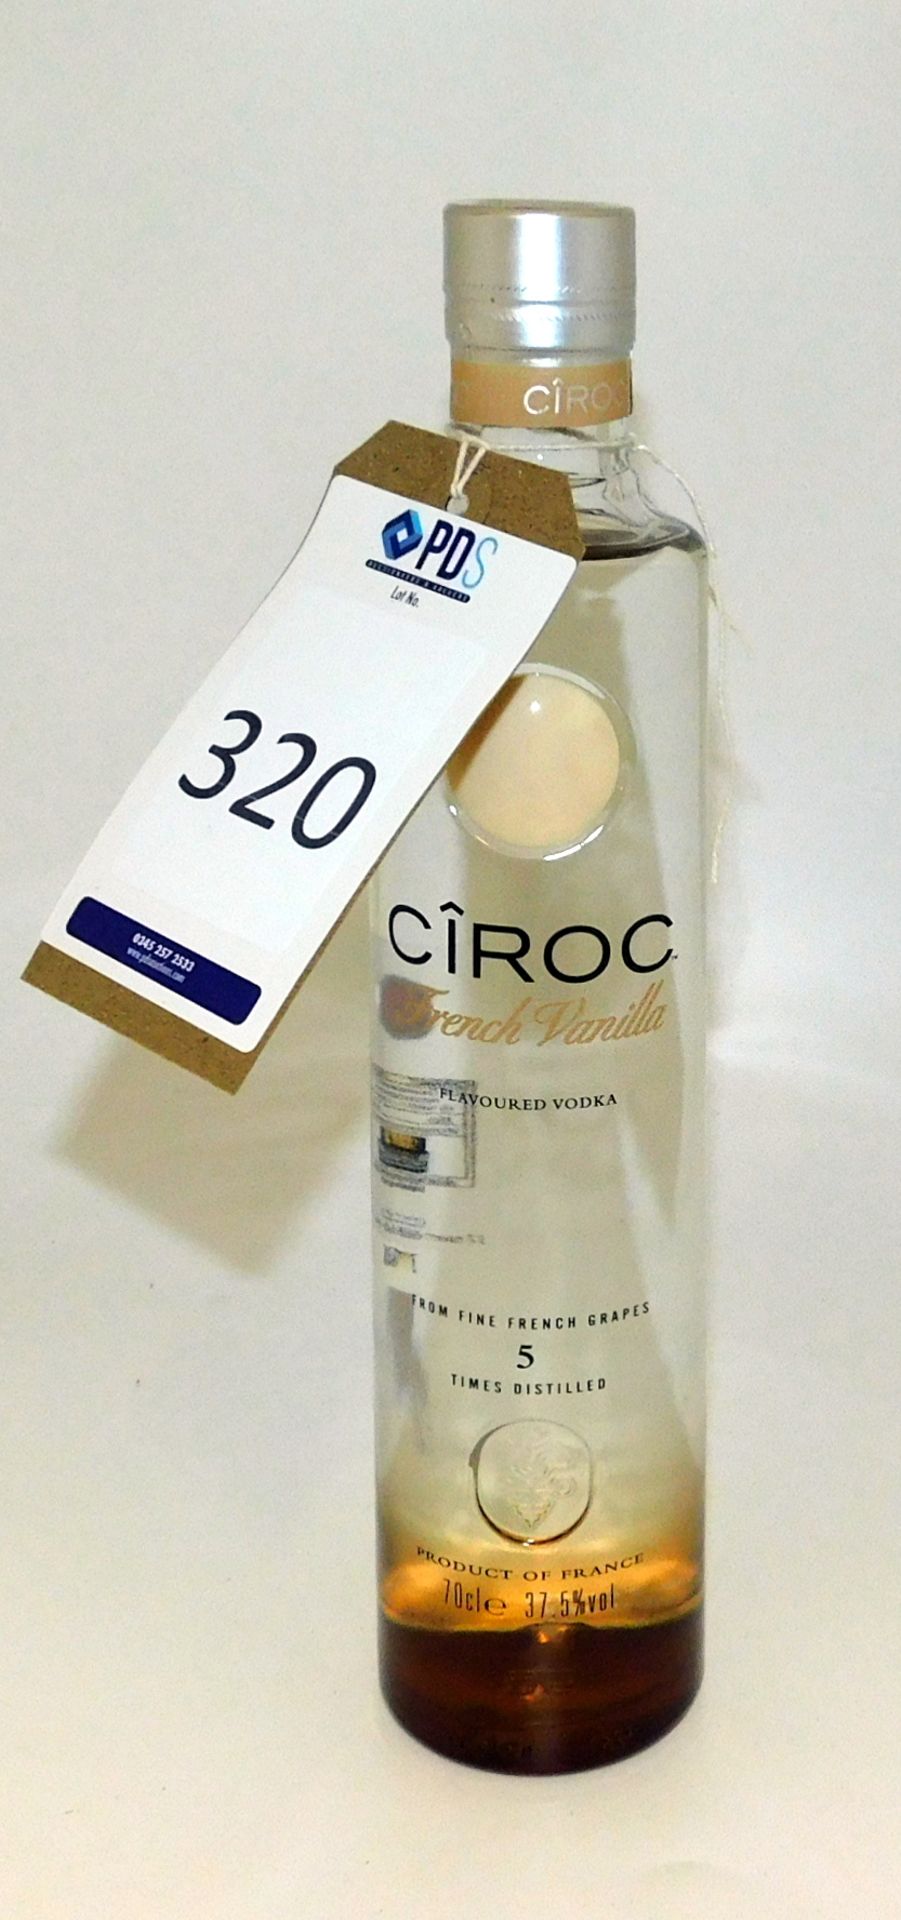 5 Bottles of Ciroc French Vanilla Vodka (Located Stockport – See General Notes For Viewing &